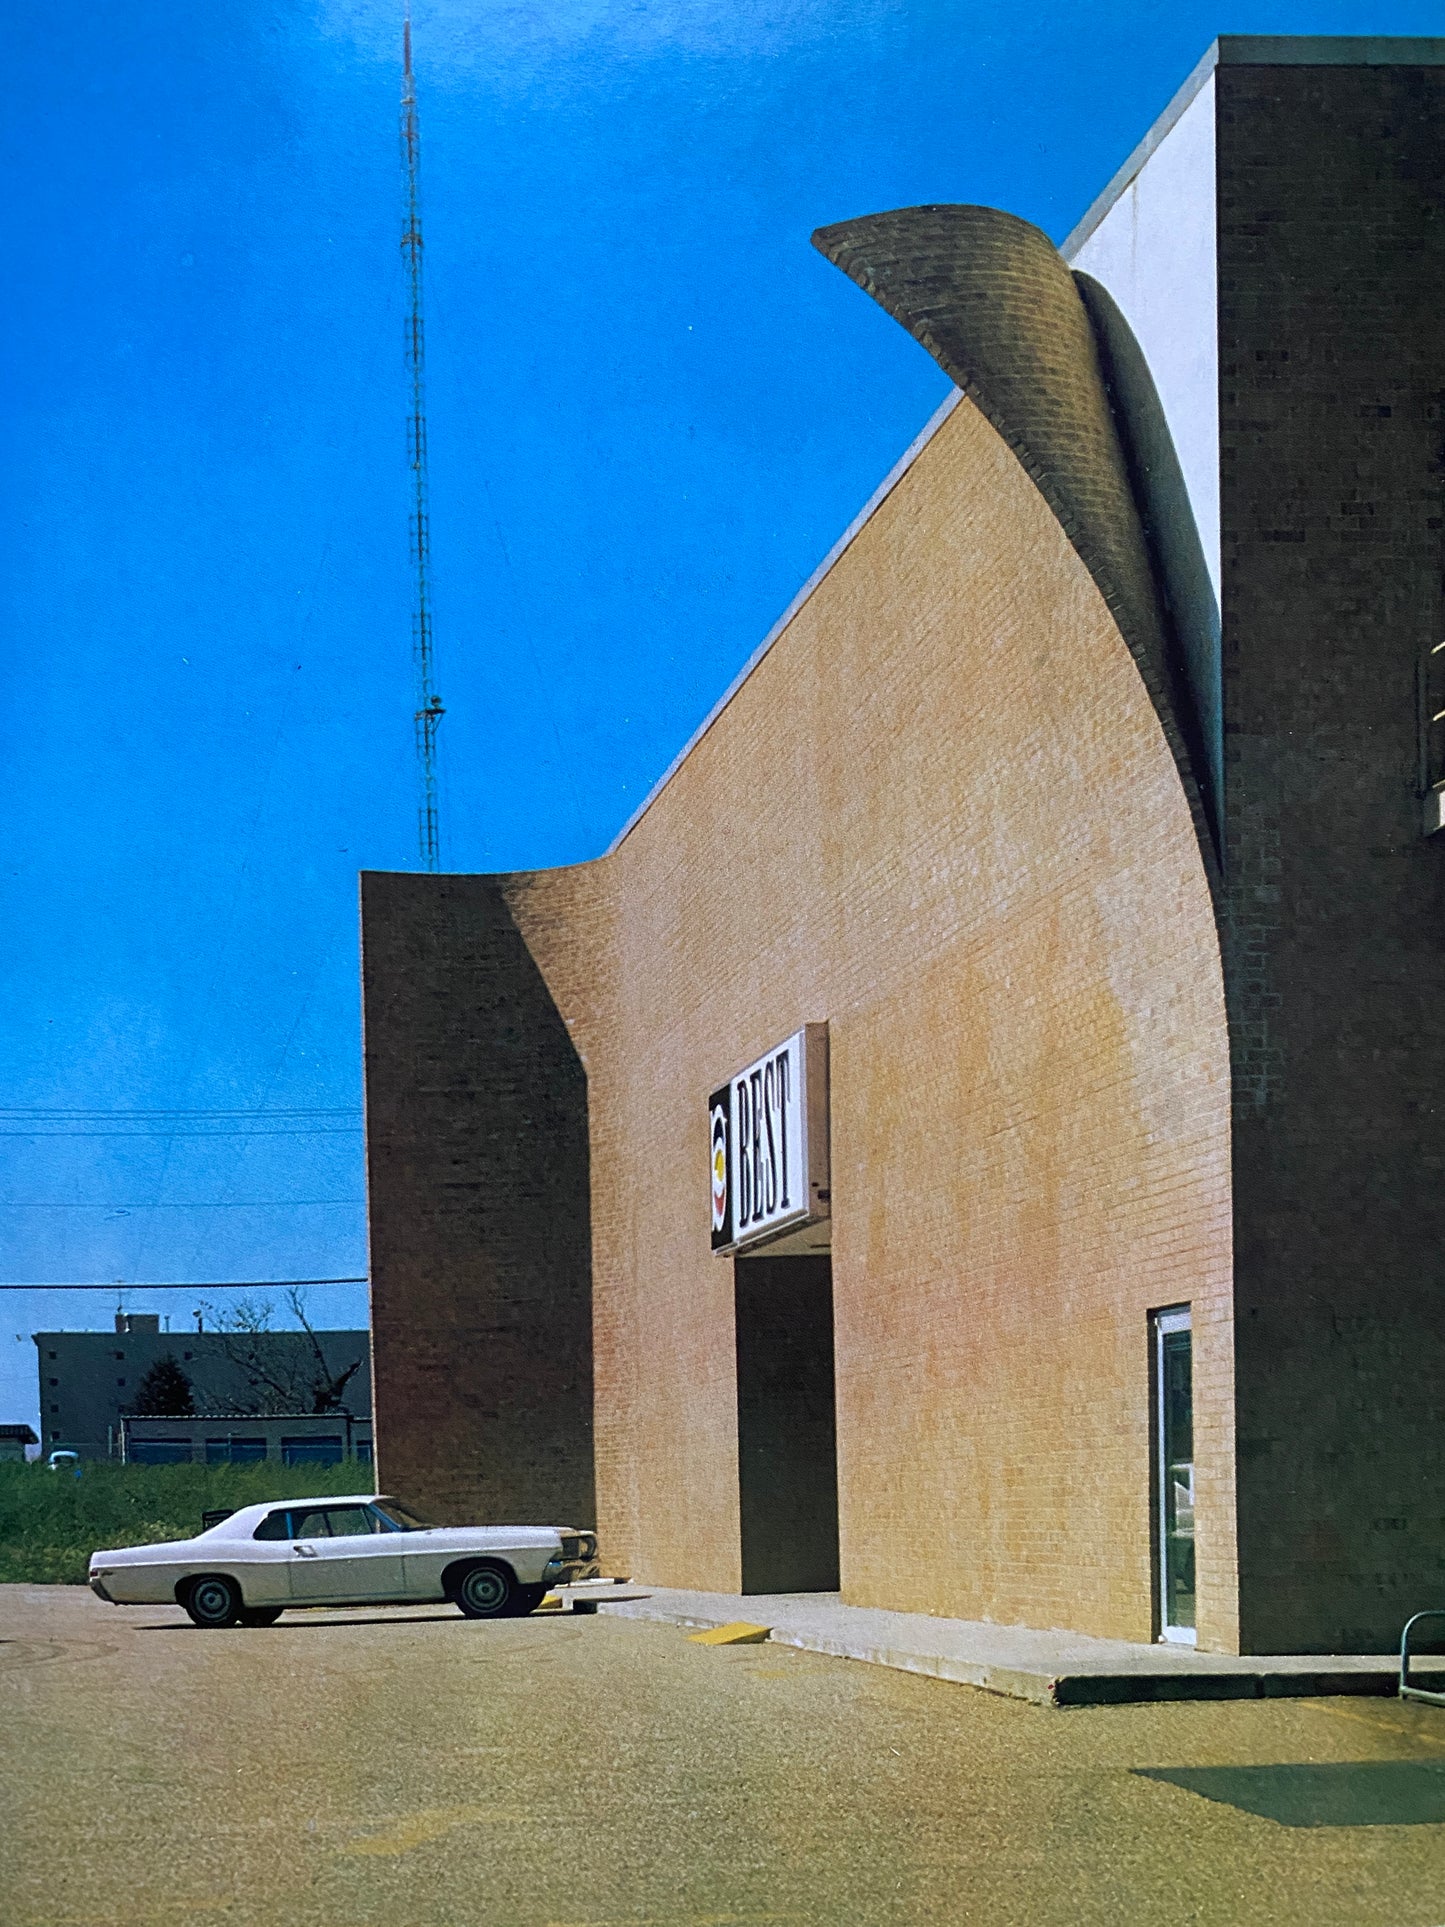 Architecture As Art (1980)